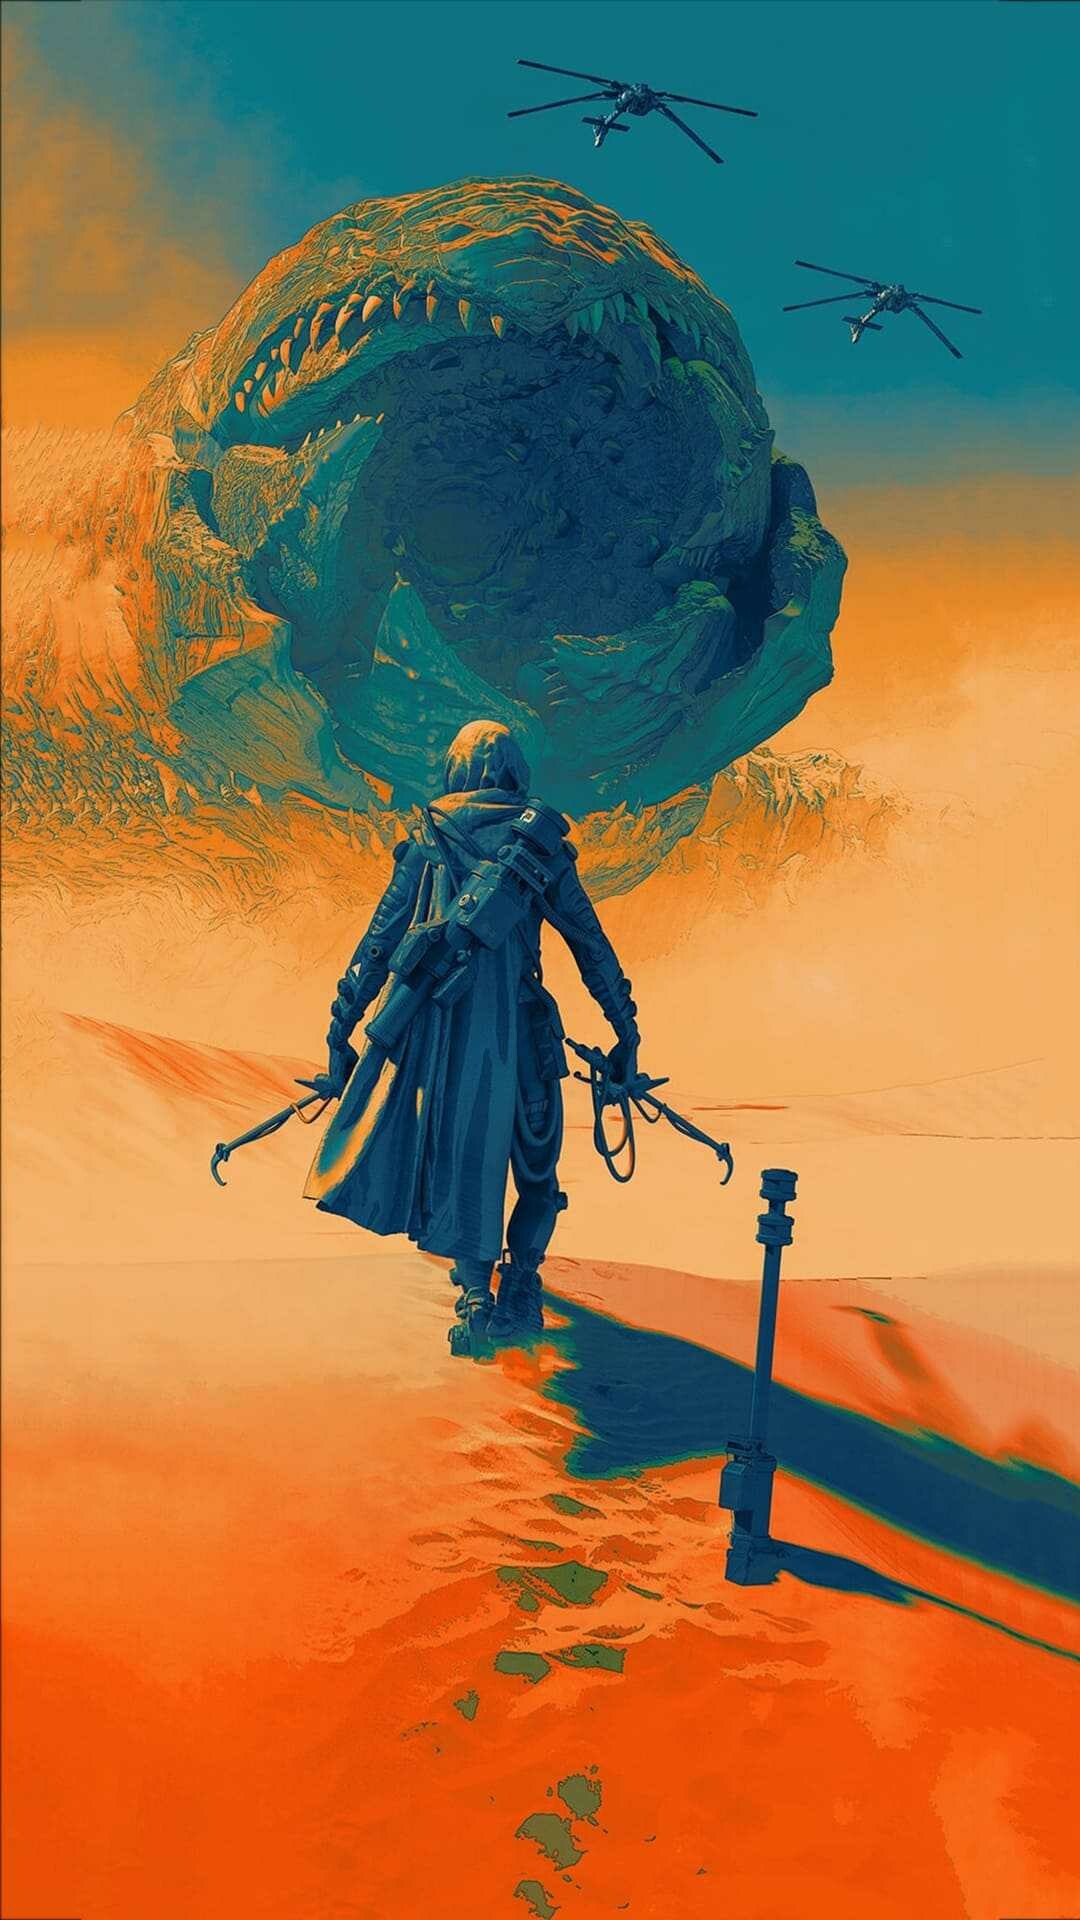 Dune: Part One: The film won 6 Oscars including "Best Achievement in Visual Effects" and "Best Achievement in Music Written for Motion Pictures". 1080x1920 Full HD Wallpaper.